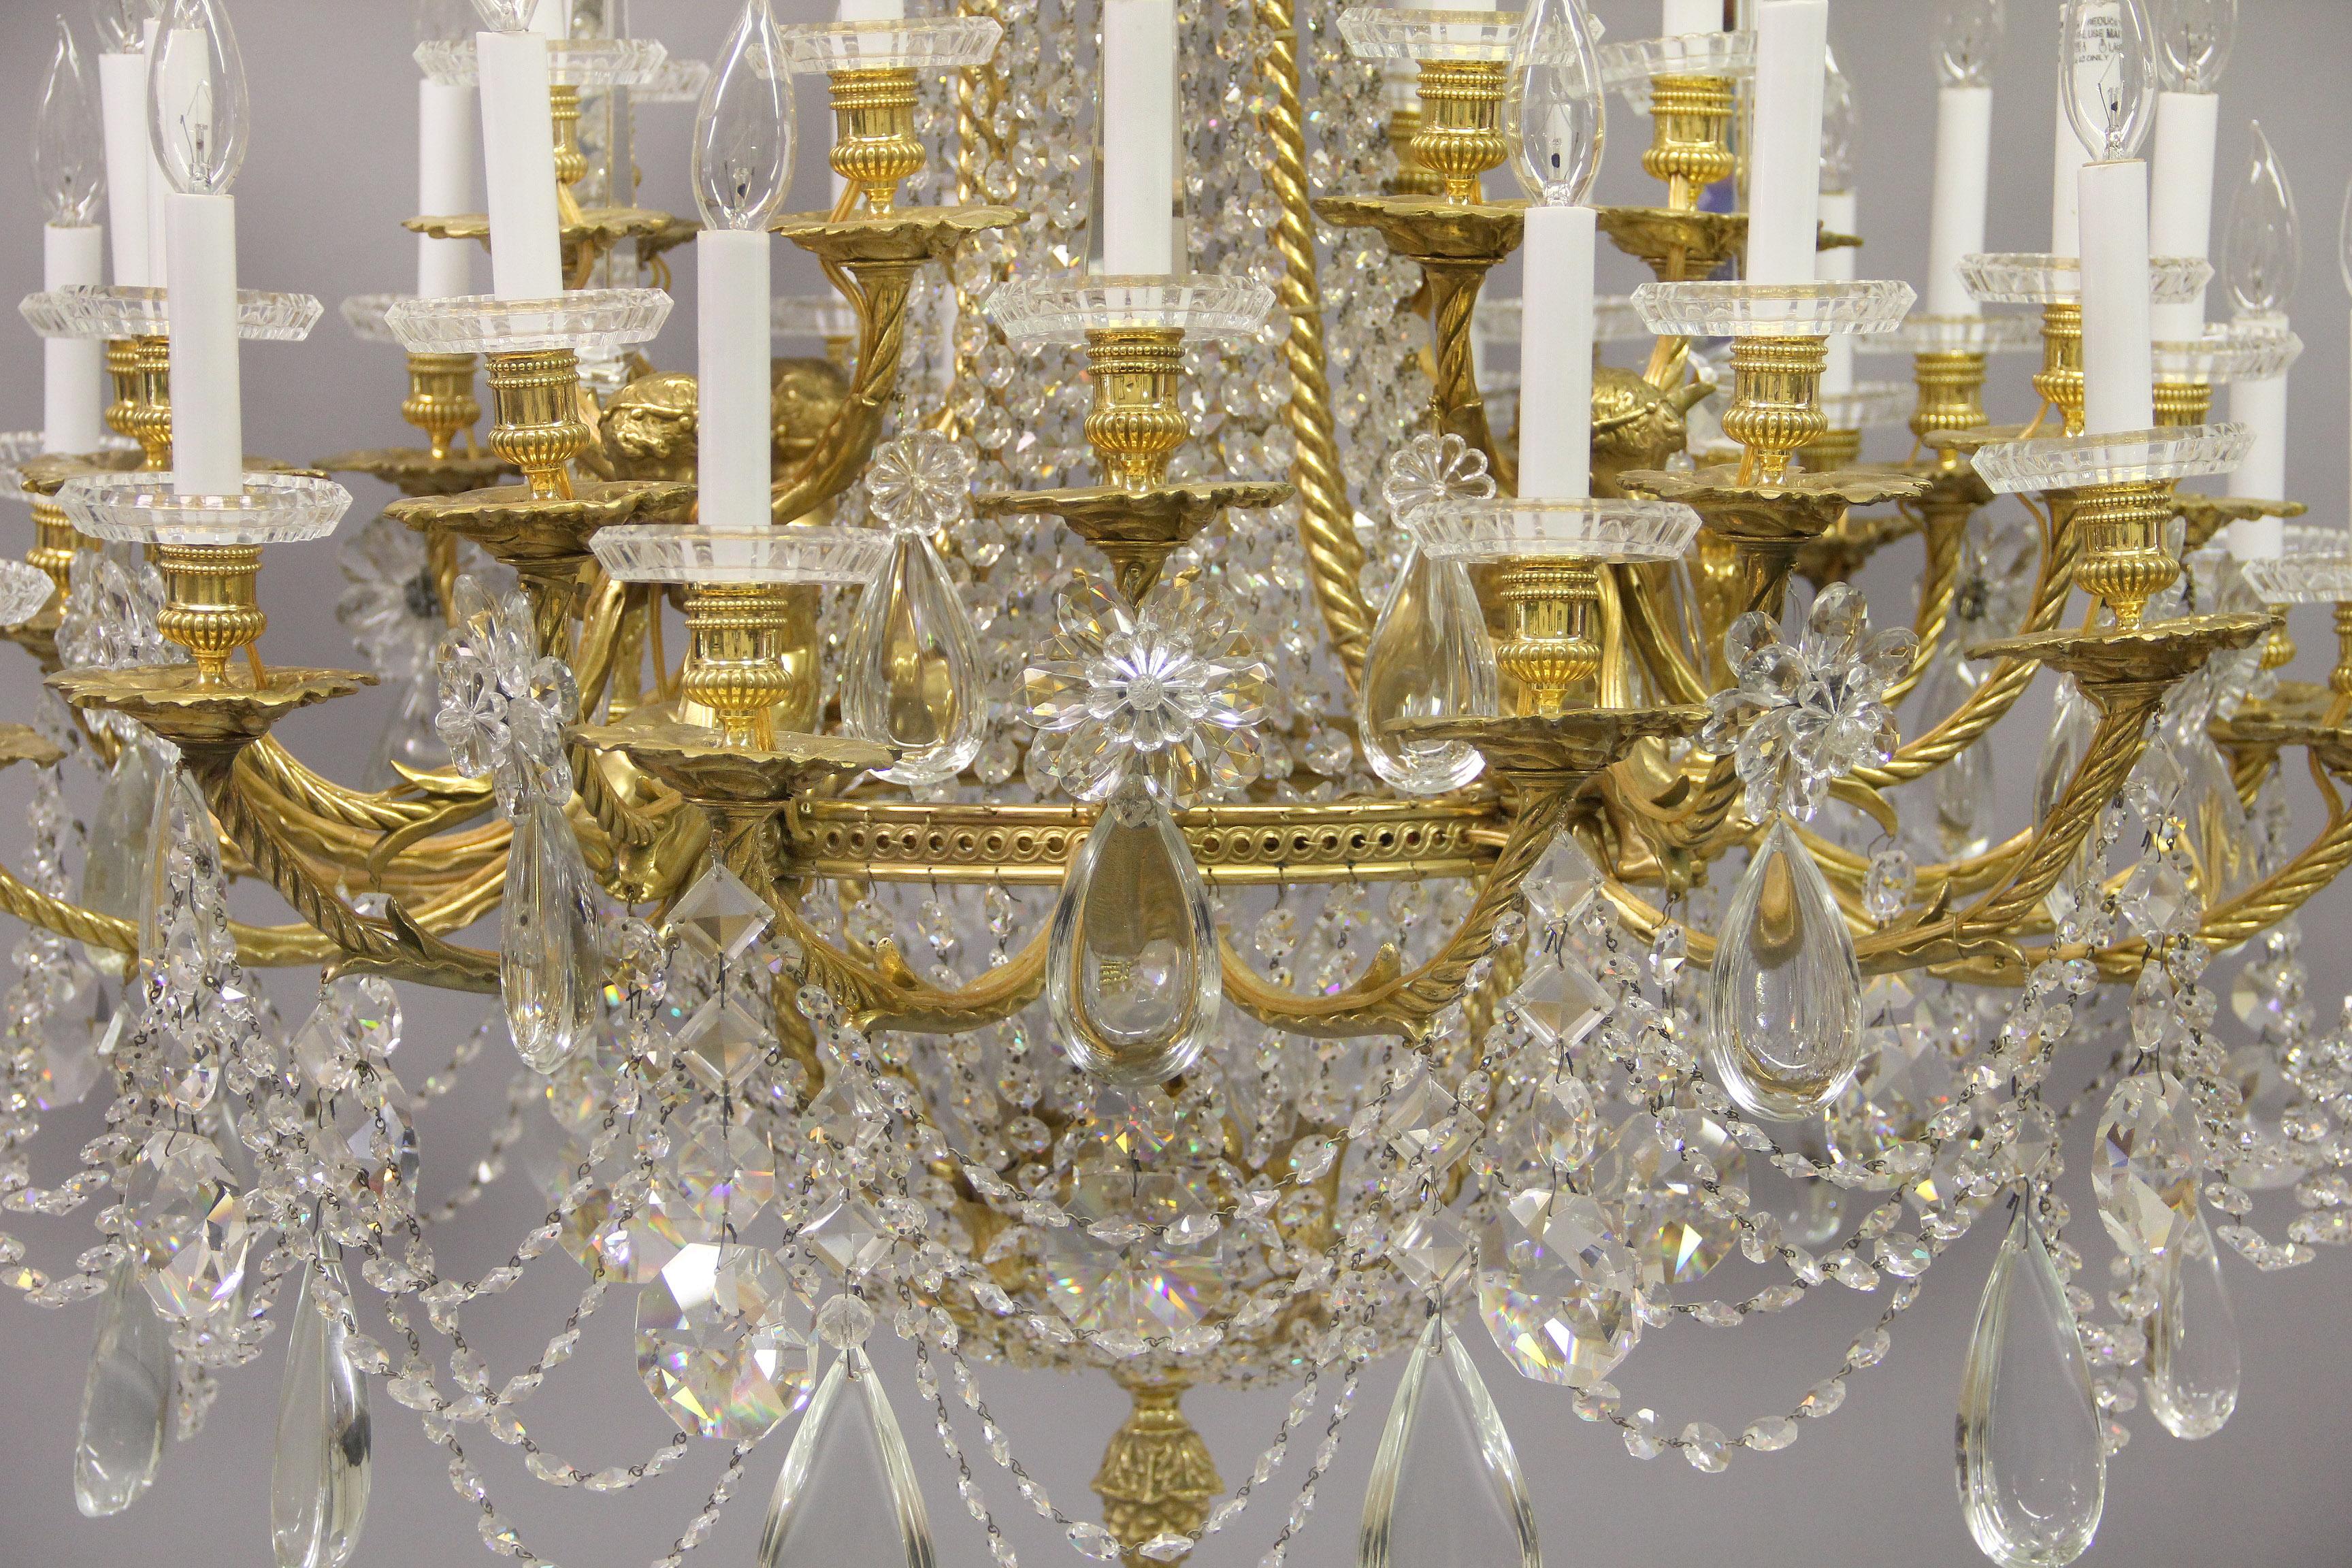 Exquisite Late 19th Century Gilt Bronze and Crystal Chandelier by Baccarat In Good Condition For Sale In New York, NY